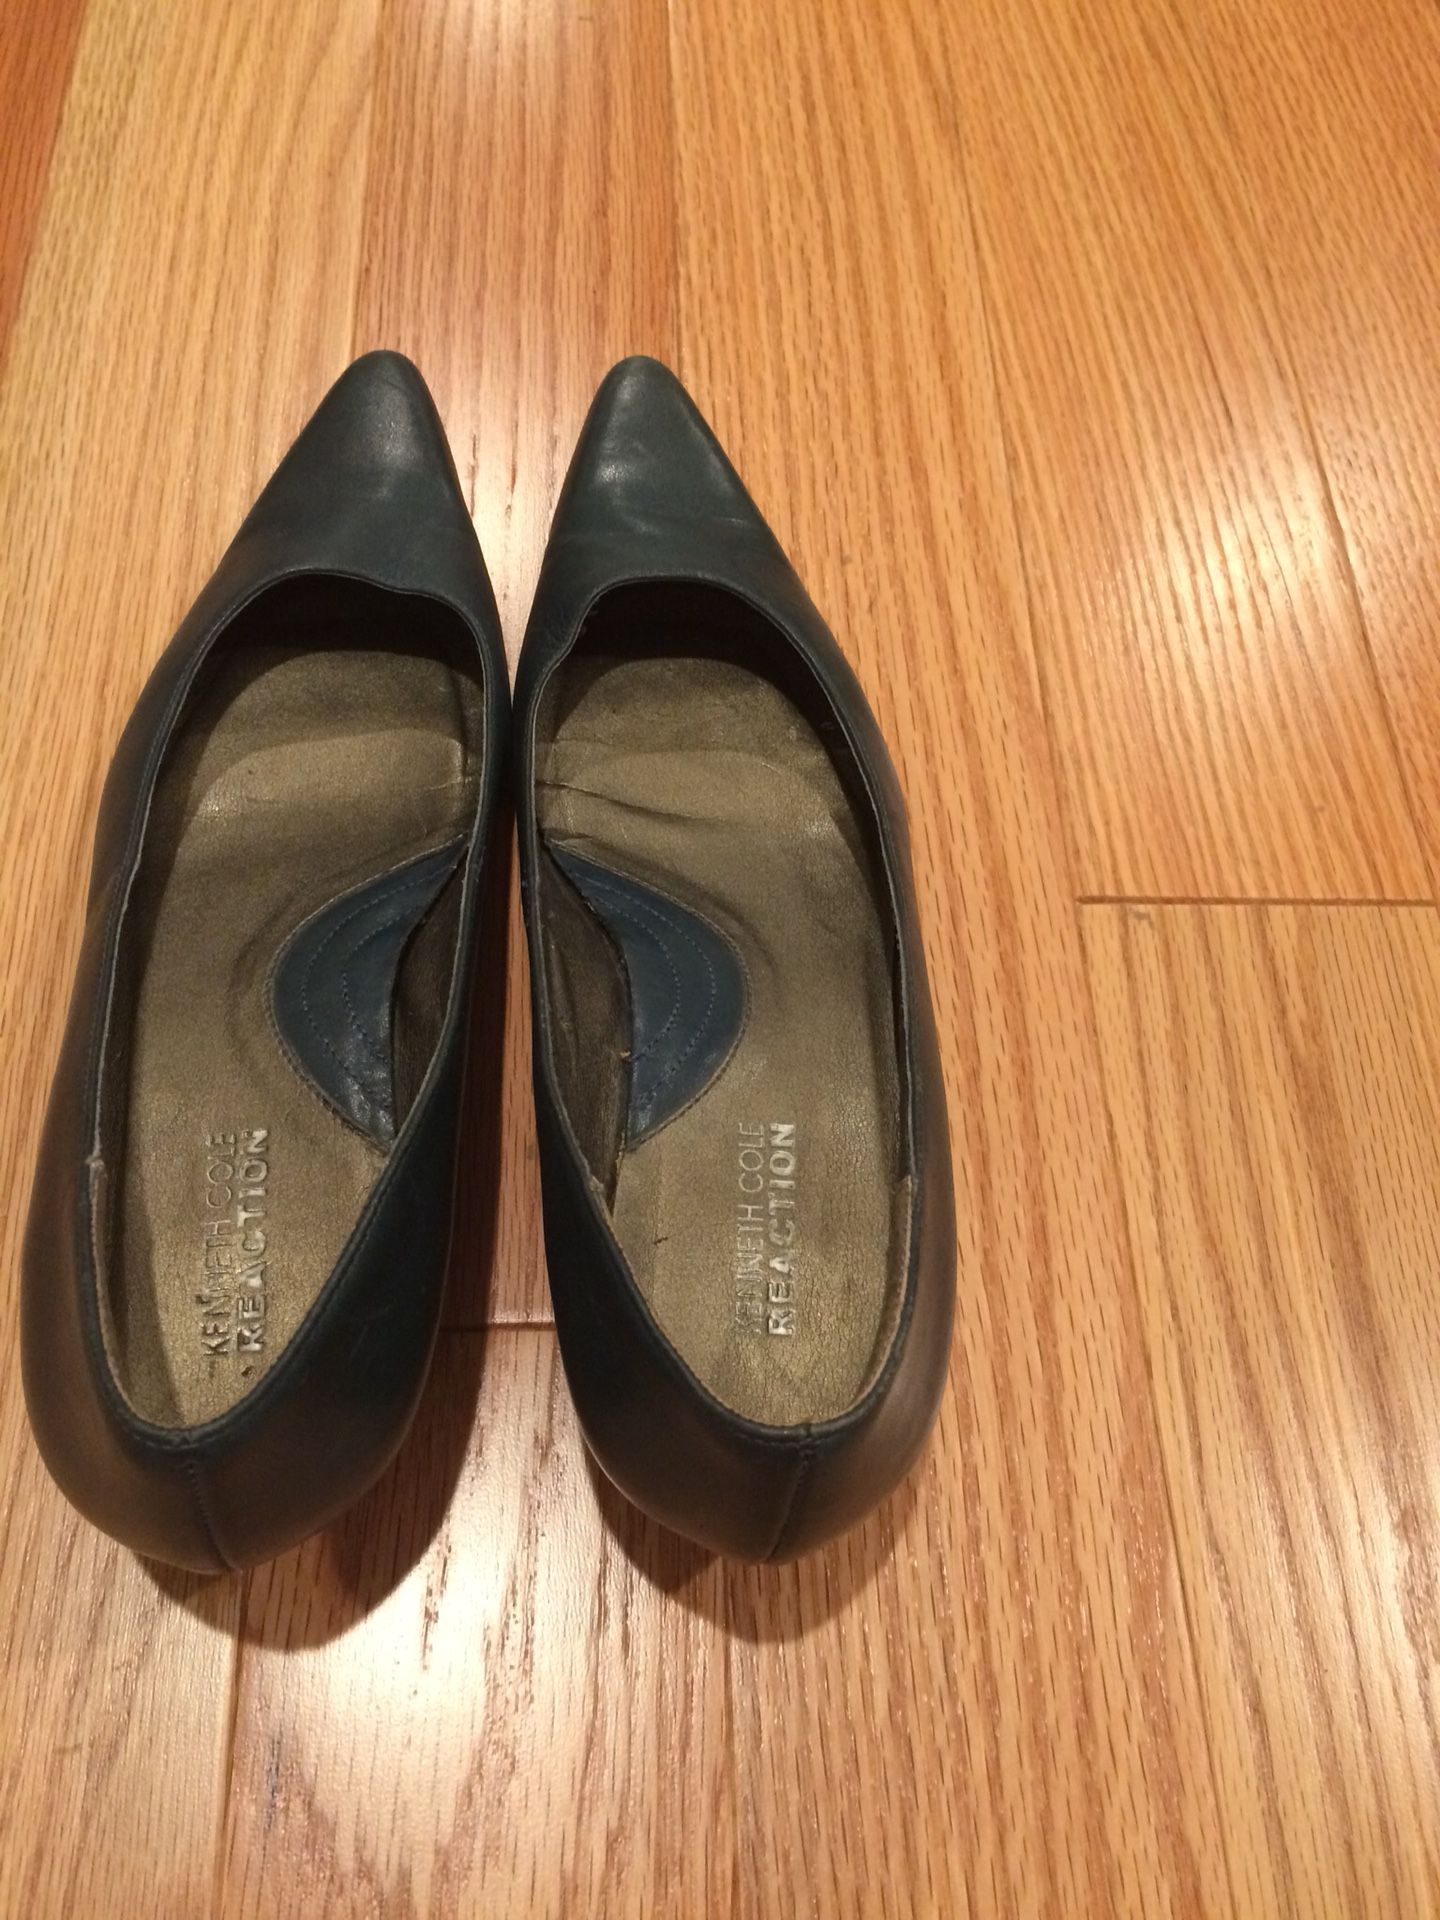 Cute navy blue Kenneth Cole heel shoes